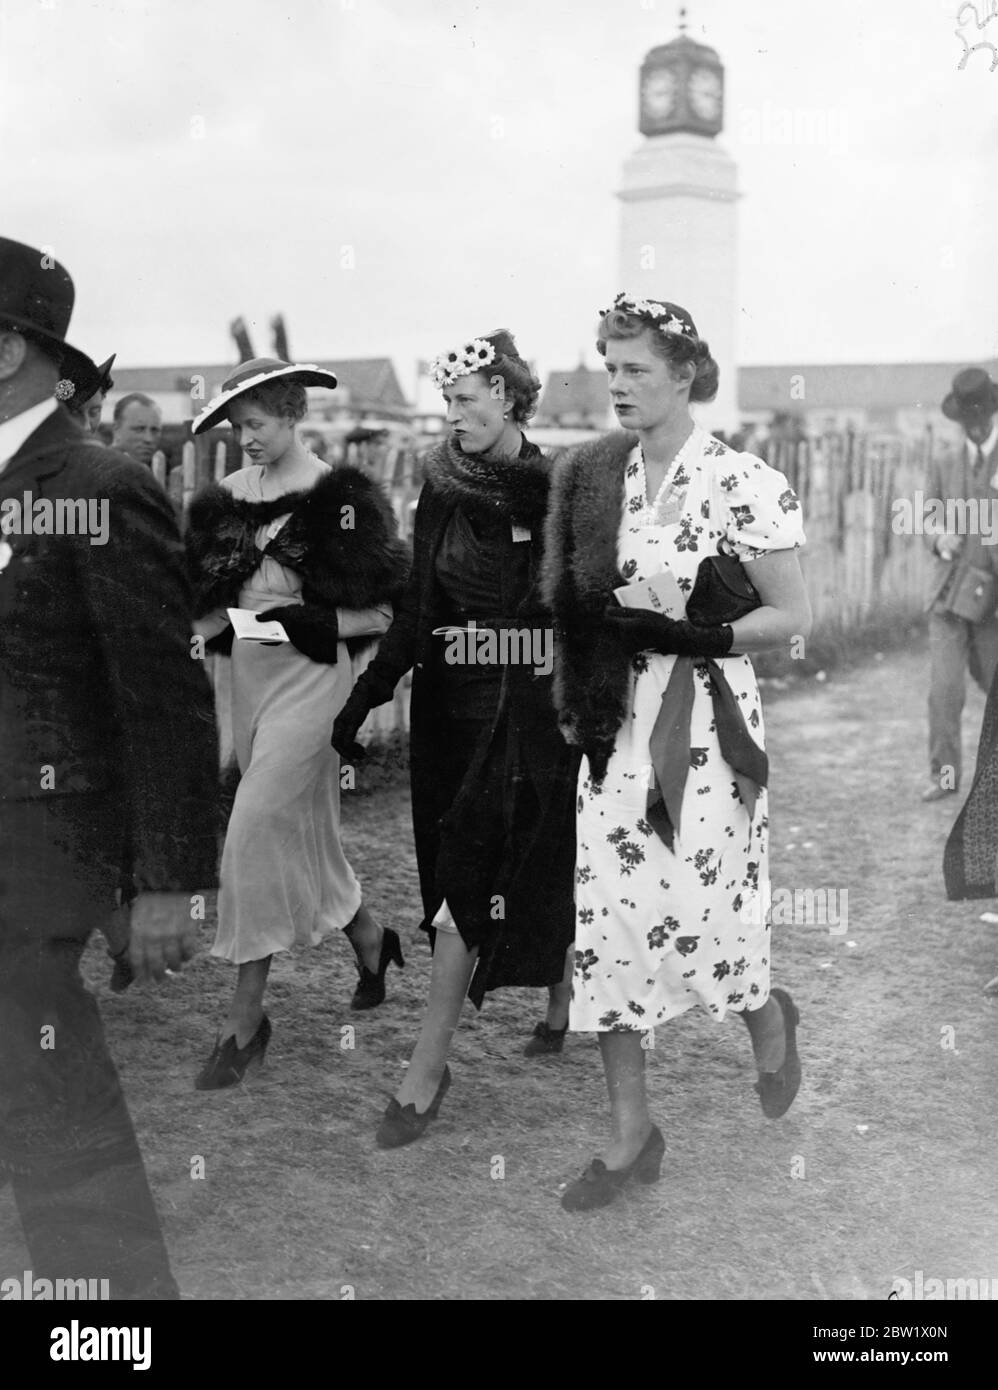 Small hats at Epsom on 'ladies Day'. Two small hats and one with a larger brim warm by smart women racegoers at Epsom on Oaks day. 4 June 1937 Stock Photo